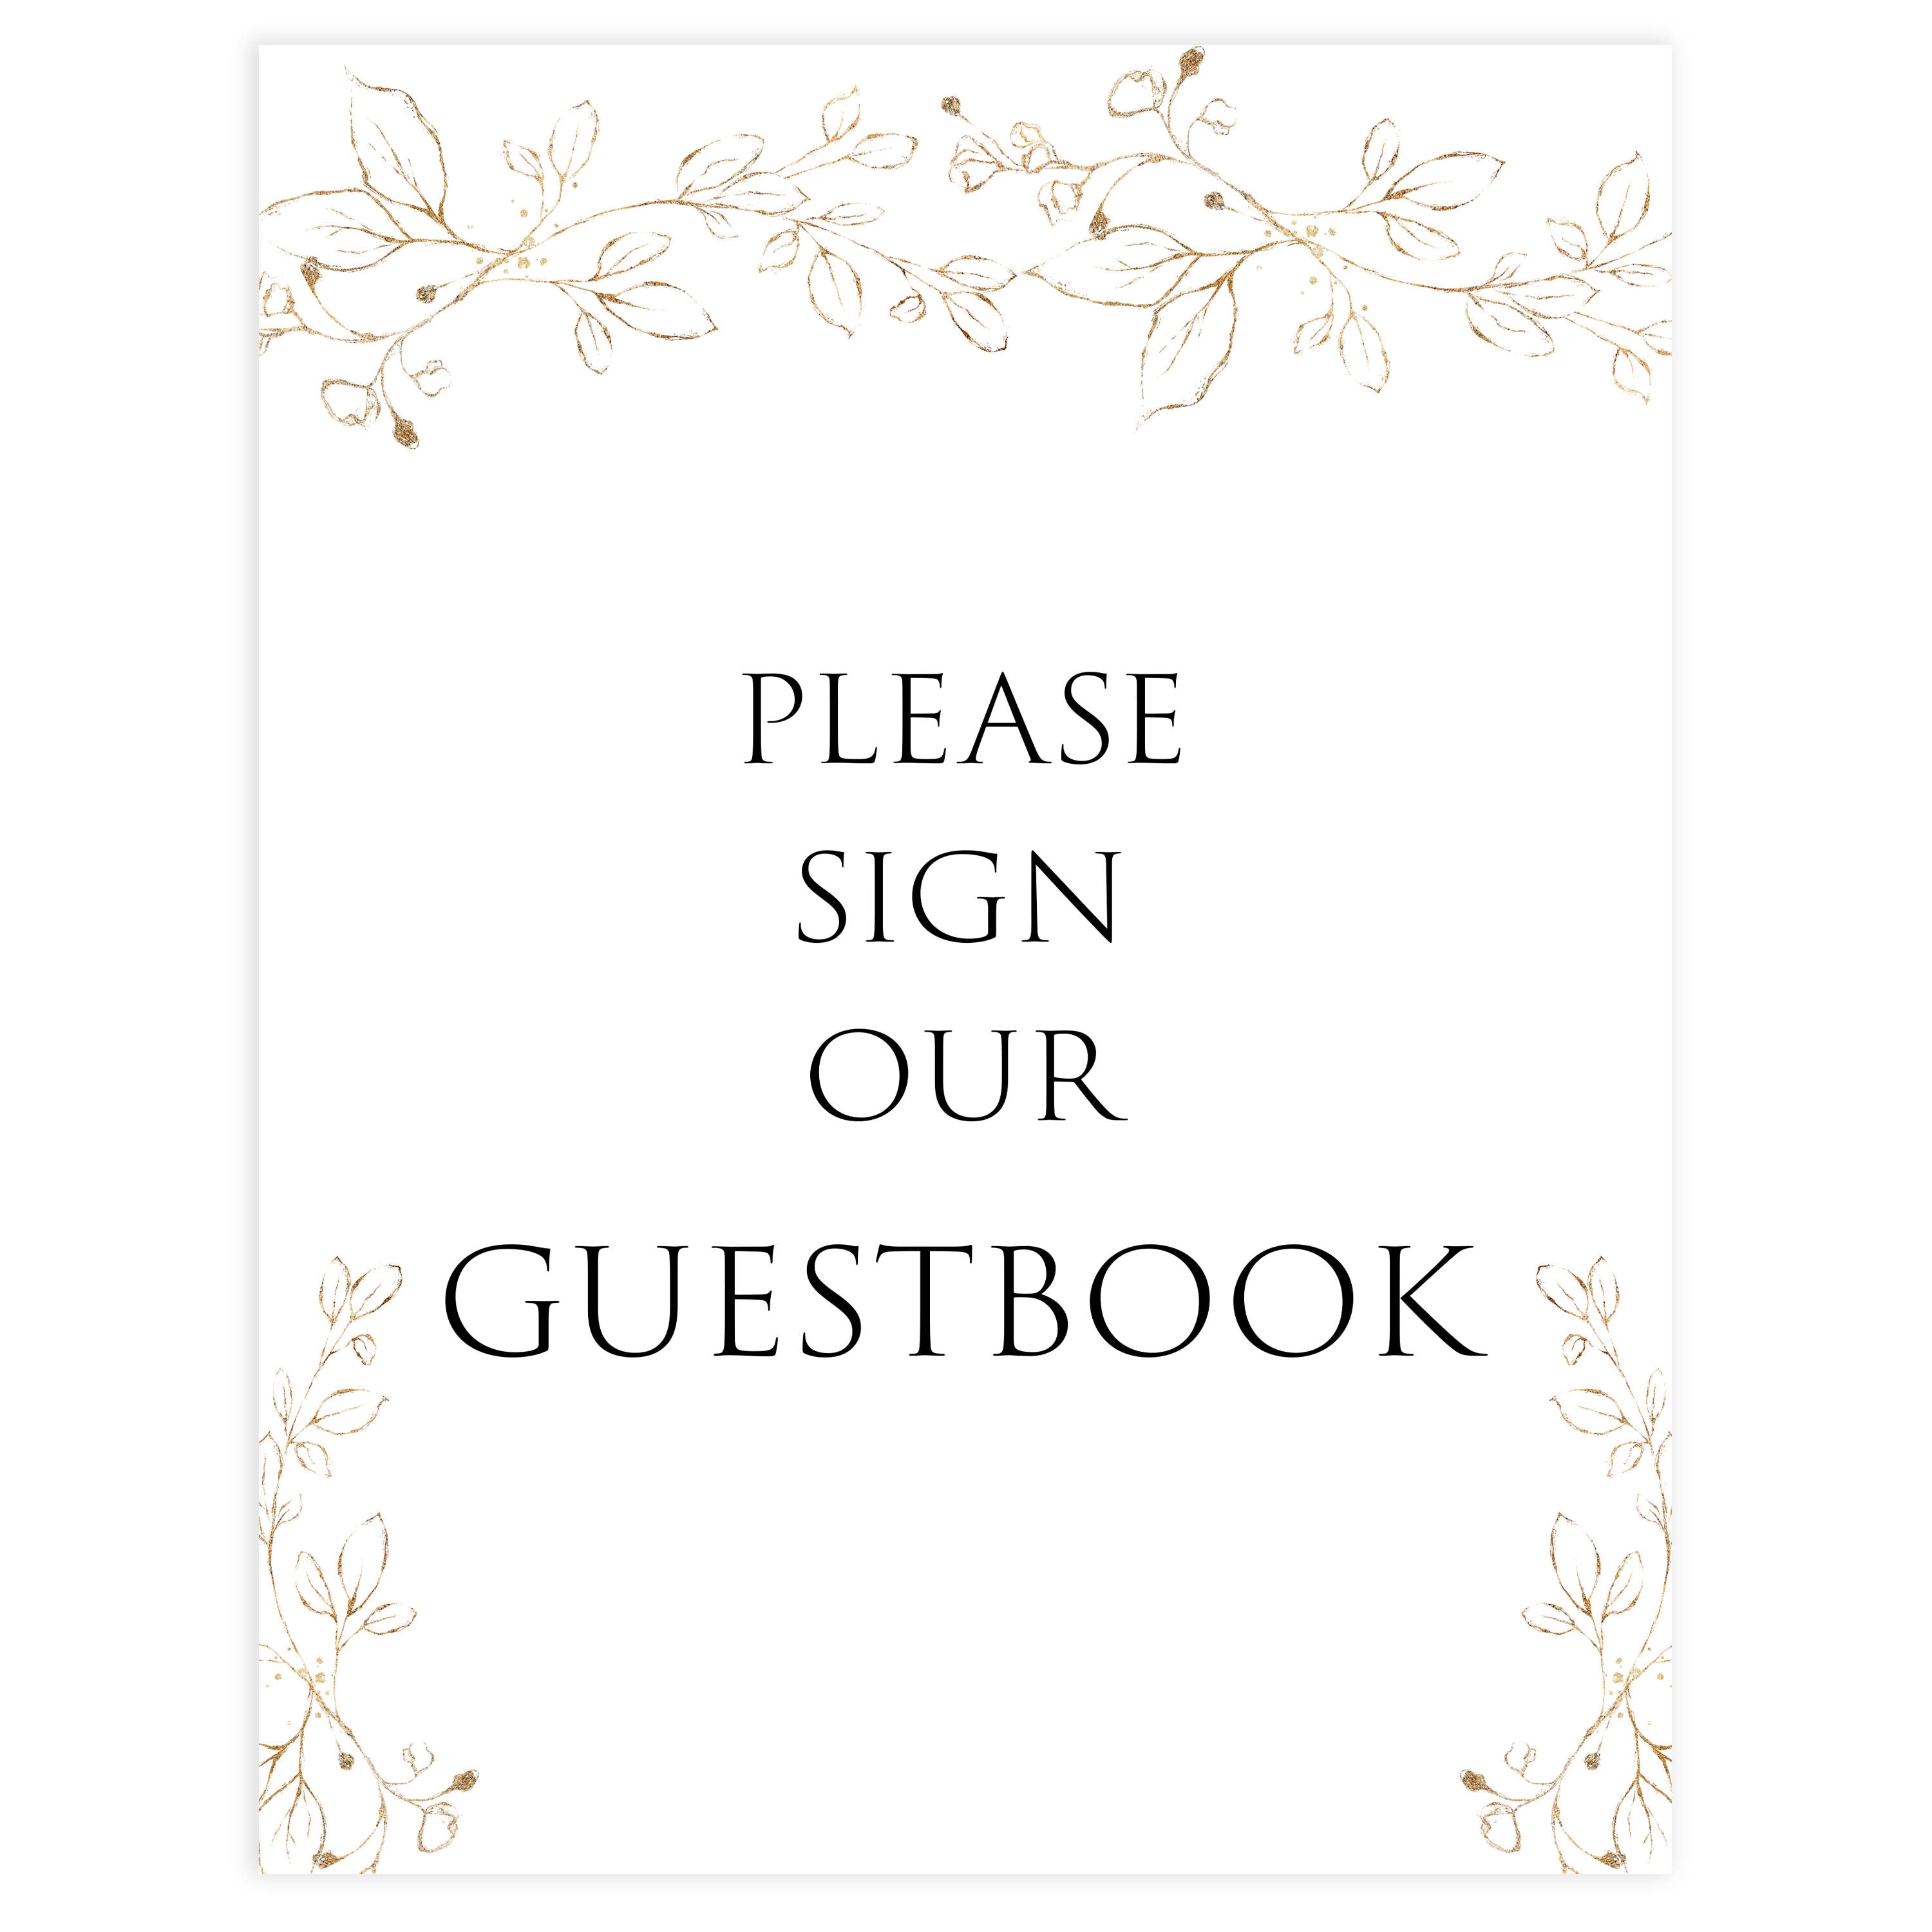 guestbook table sign, Gold leaf baby decor, printable baby table signs, printable baby decor, baby gold leaf table signs, fun baby signs, baby gold leaf fun baby table signs